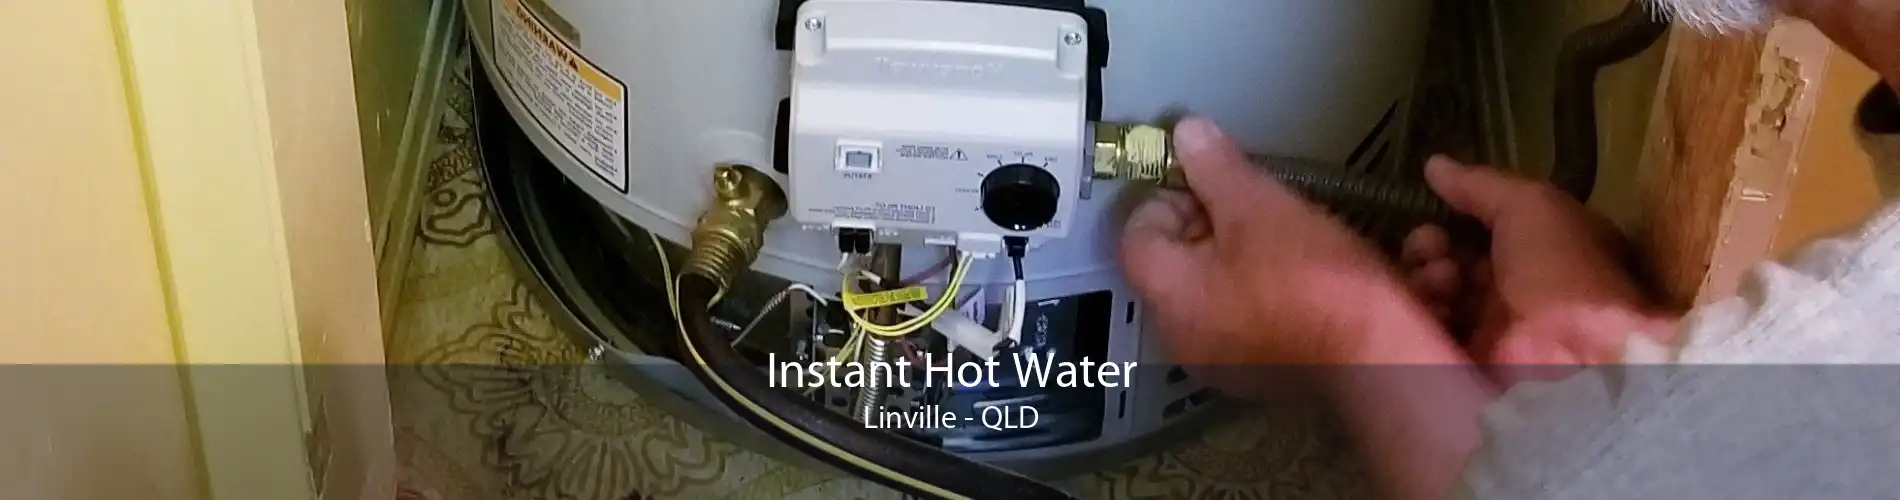 Instant Hot Water Linville - QLD